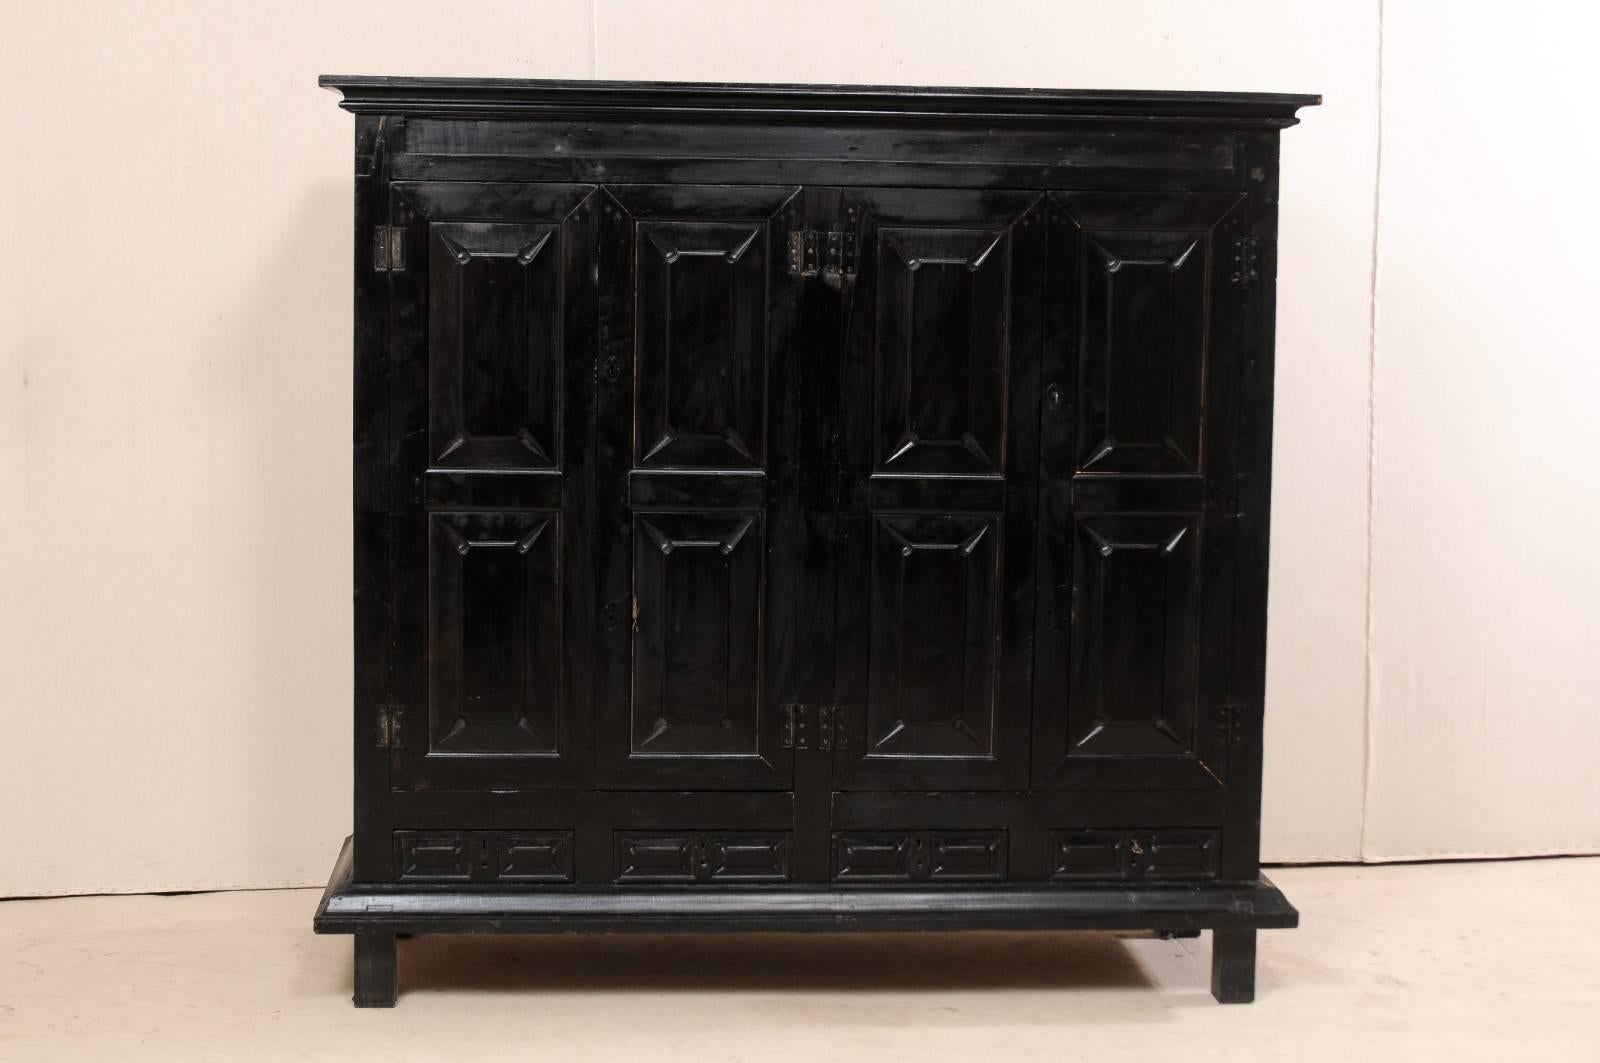 A British Colonial cabinet from the mid-20th century. This vintage storage cabinet from midcentury stands approximately 6.5 ft tall and just over 6 ft wide. It features four carved panel doors, revealing the interior shelving within, over four